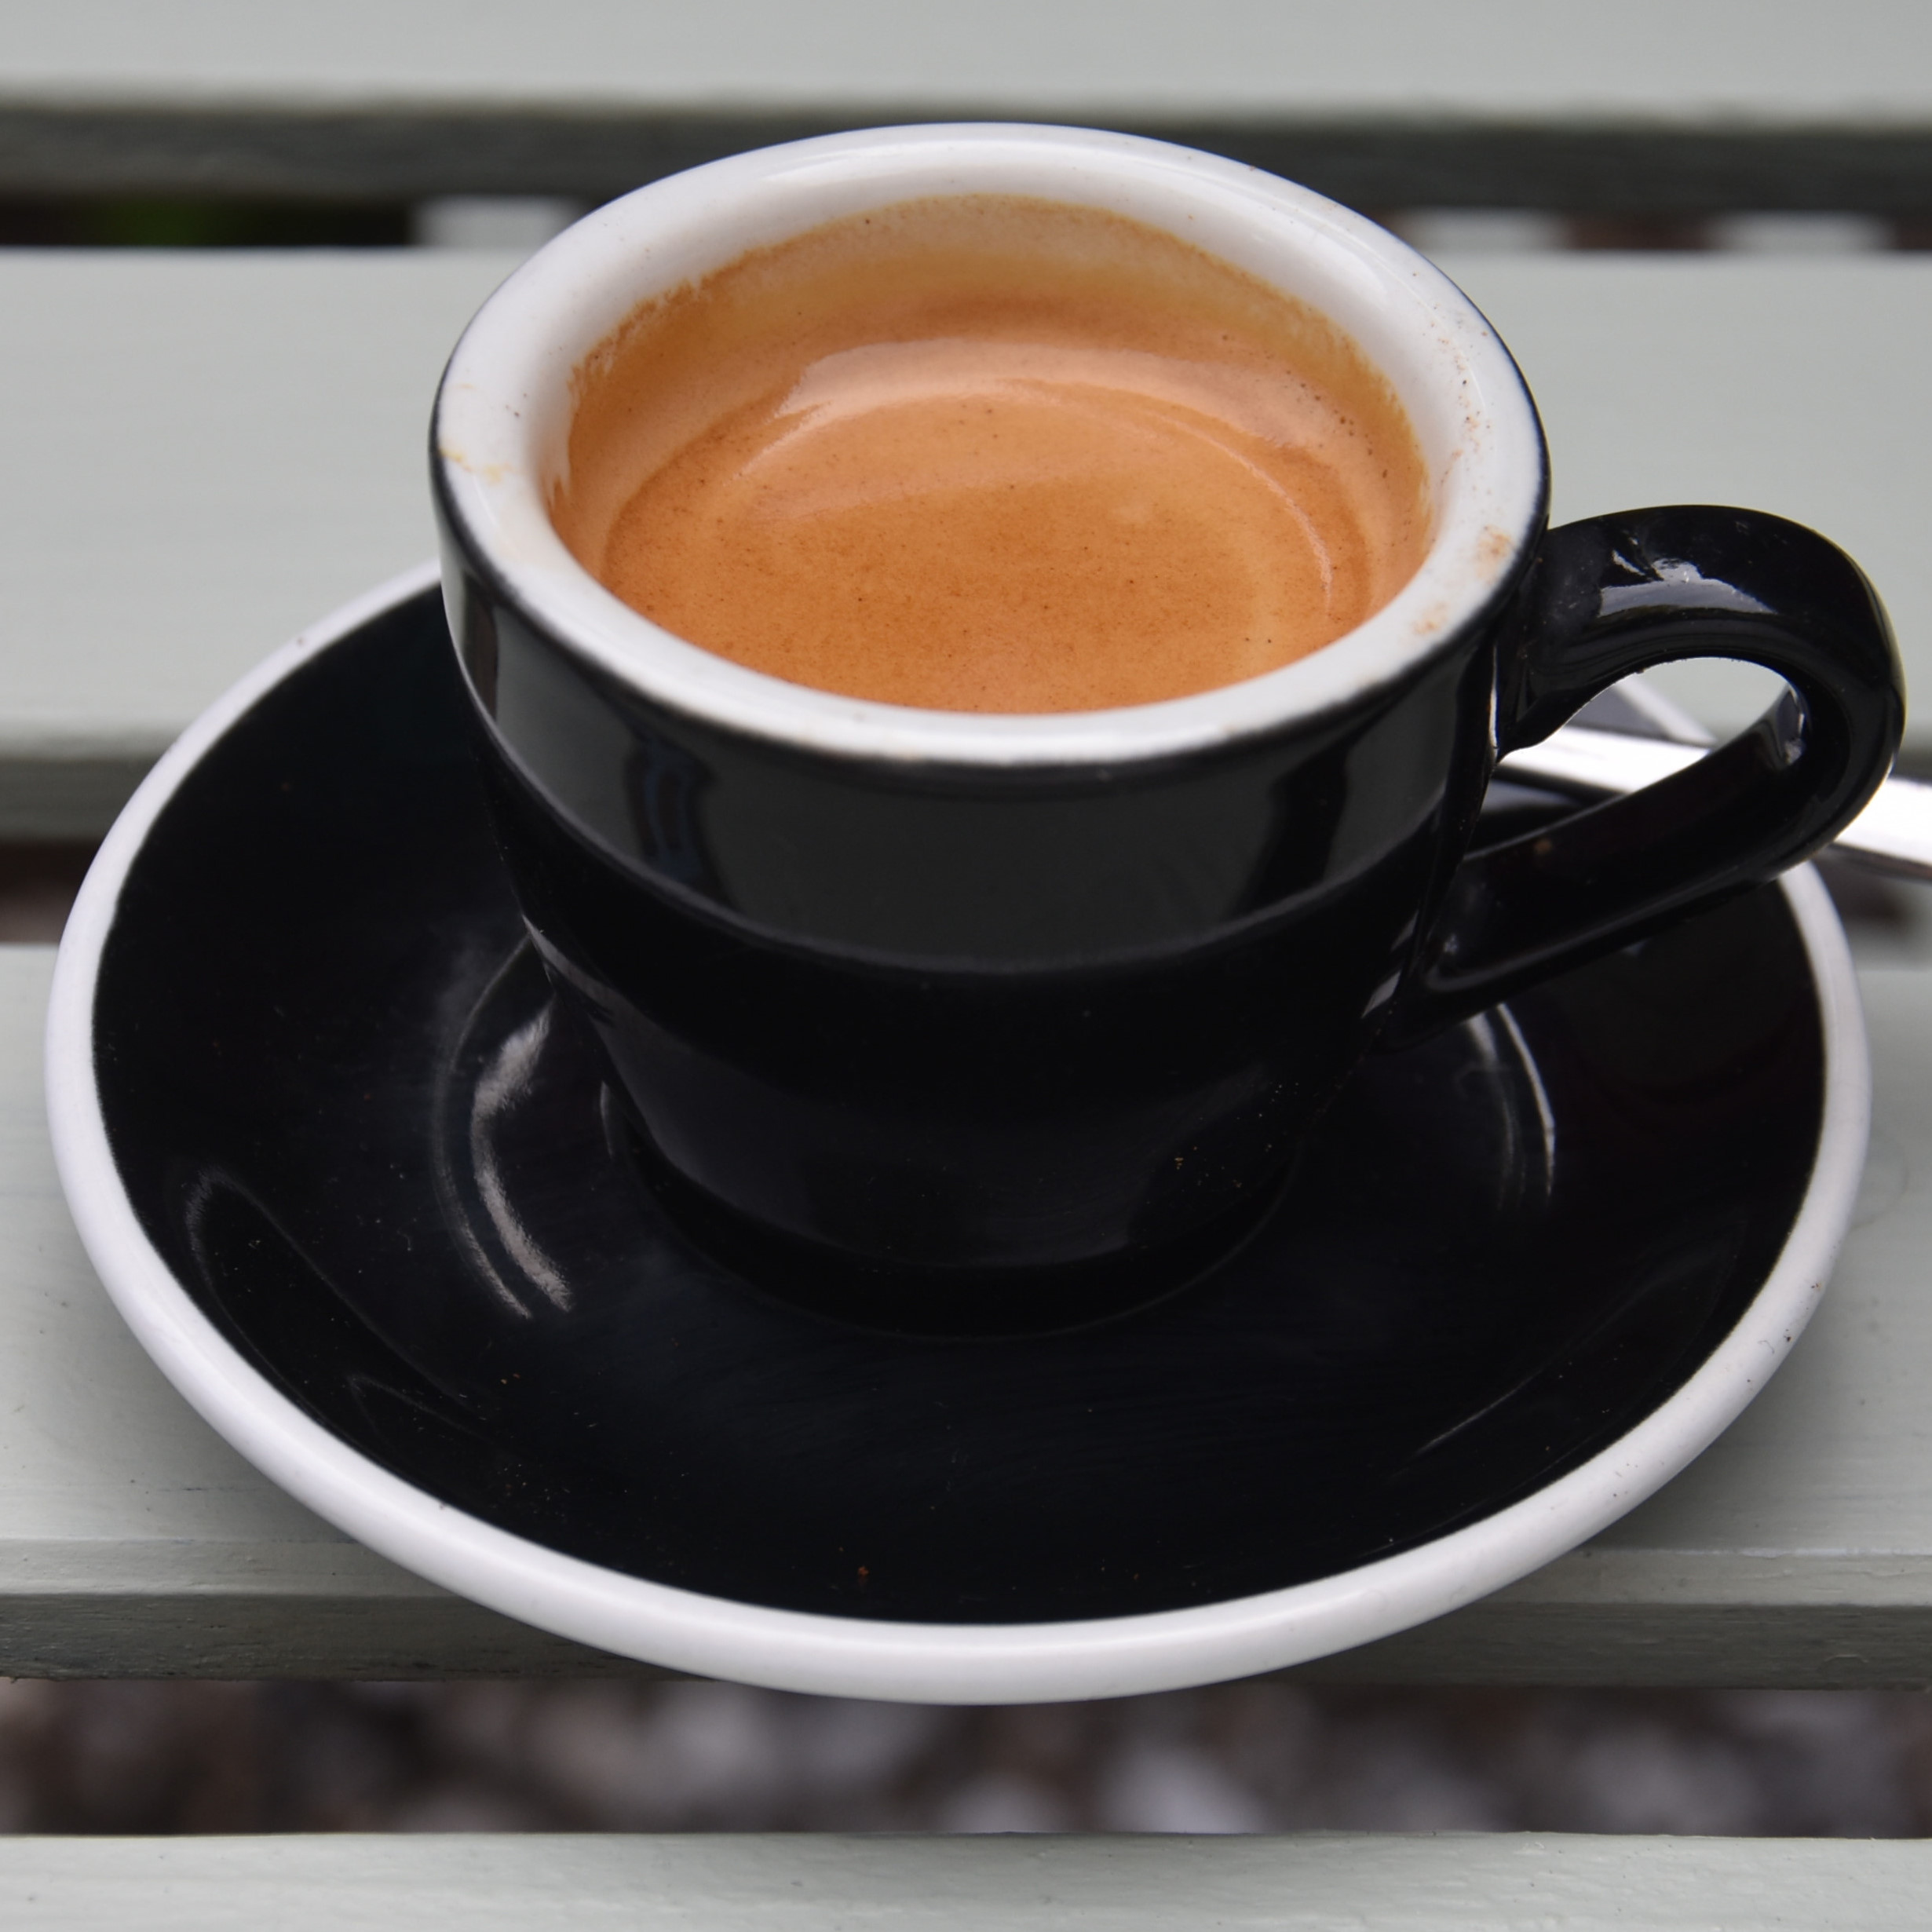 A classic espresso in a classic black cup, served at The Coffee Traveller in Chiswick.